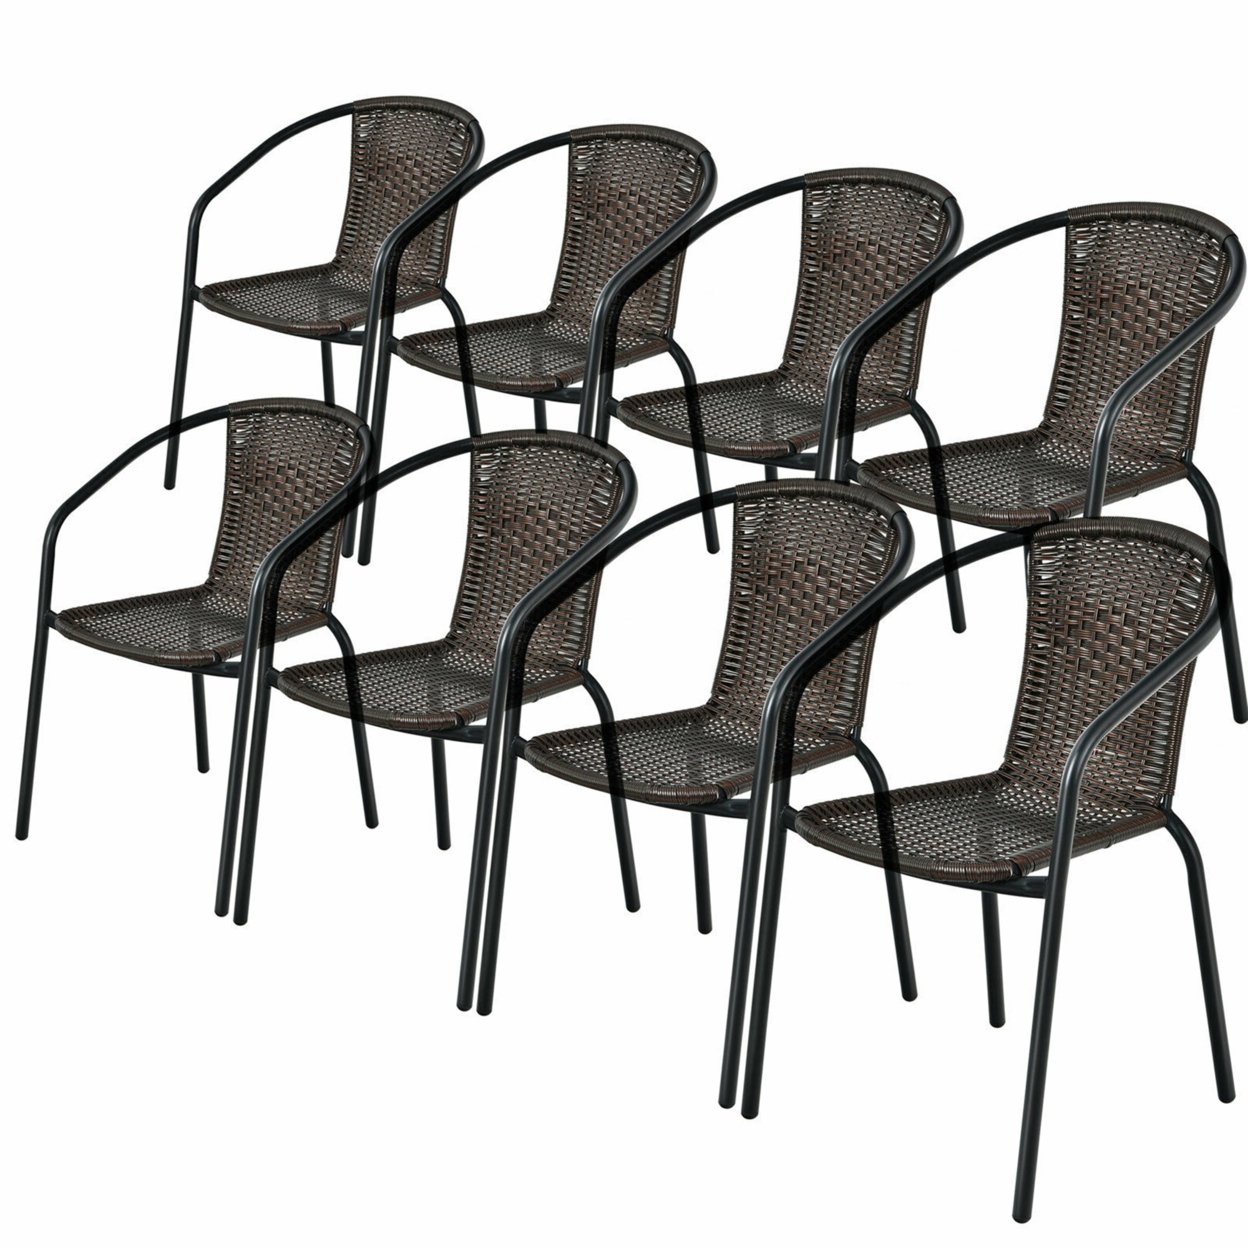 Gymax Patio Rattan Dining Chair Outdoor Stackable Armchair Yard Garden - Brown, 8 Pcs